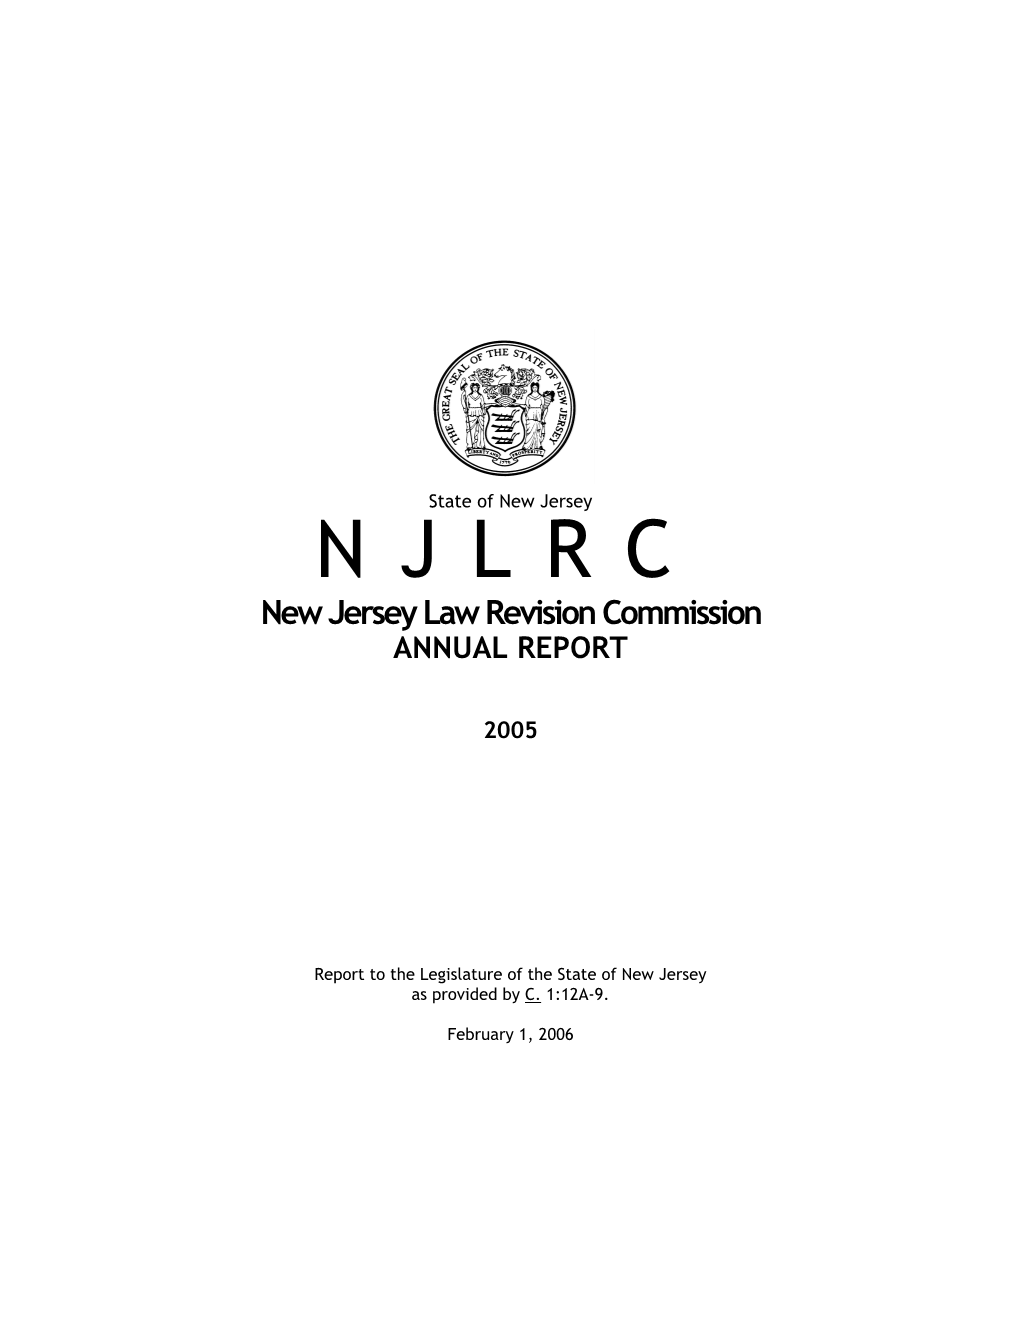 New Jersey Law Revision Commission ANNUAL REPORT